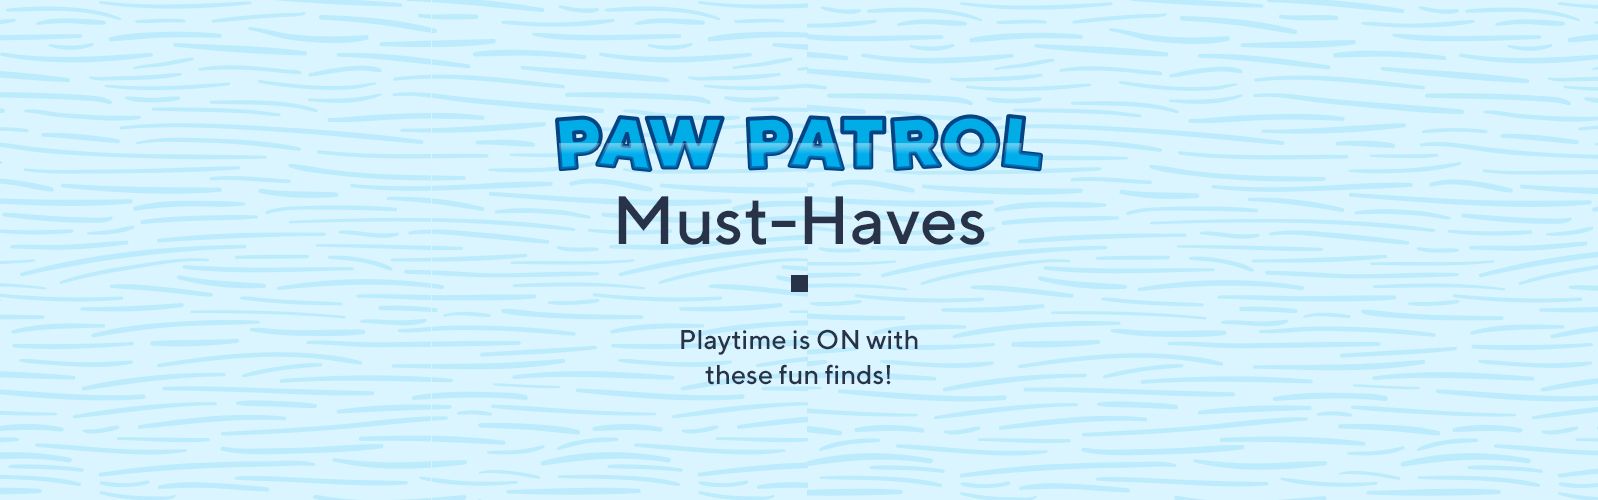 Paw Patrol Must-Haves - Playtime is ON with these fun finds! 